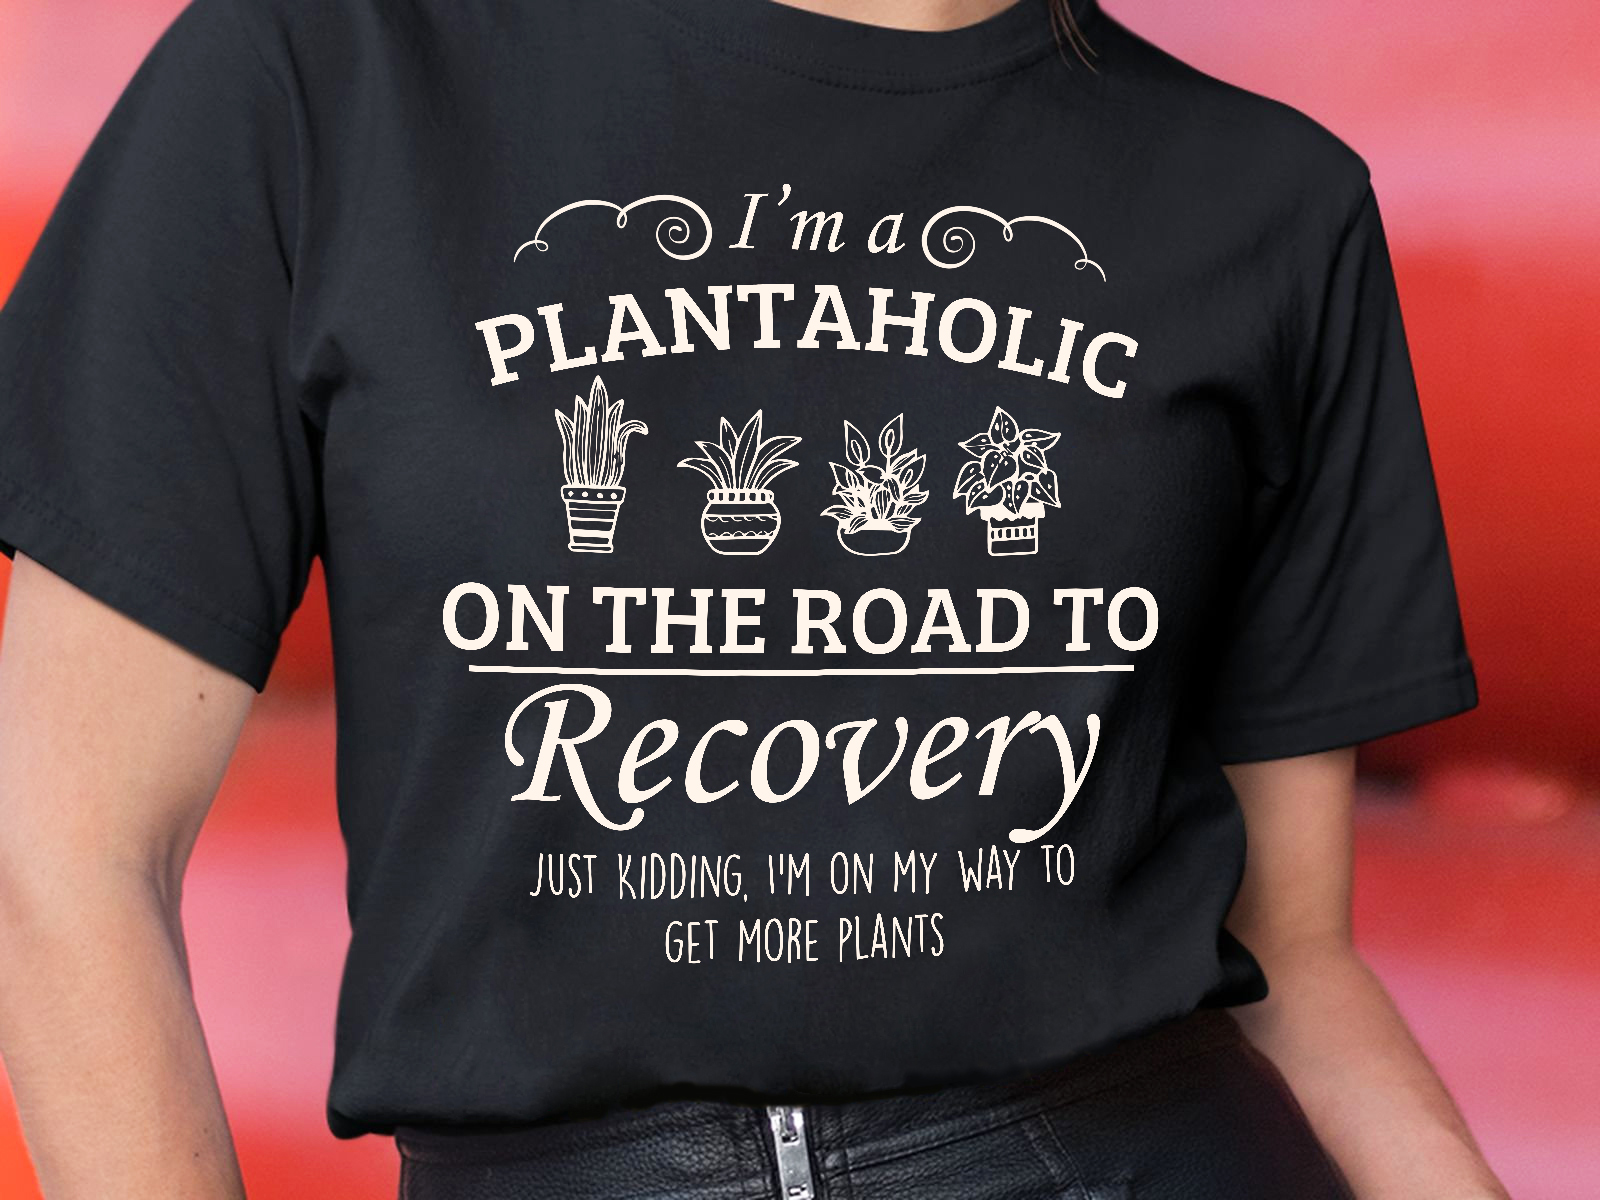 I'm a plantaholic on the road to recovery - Pots of plants